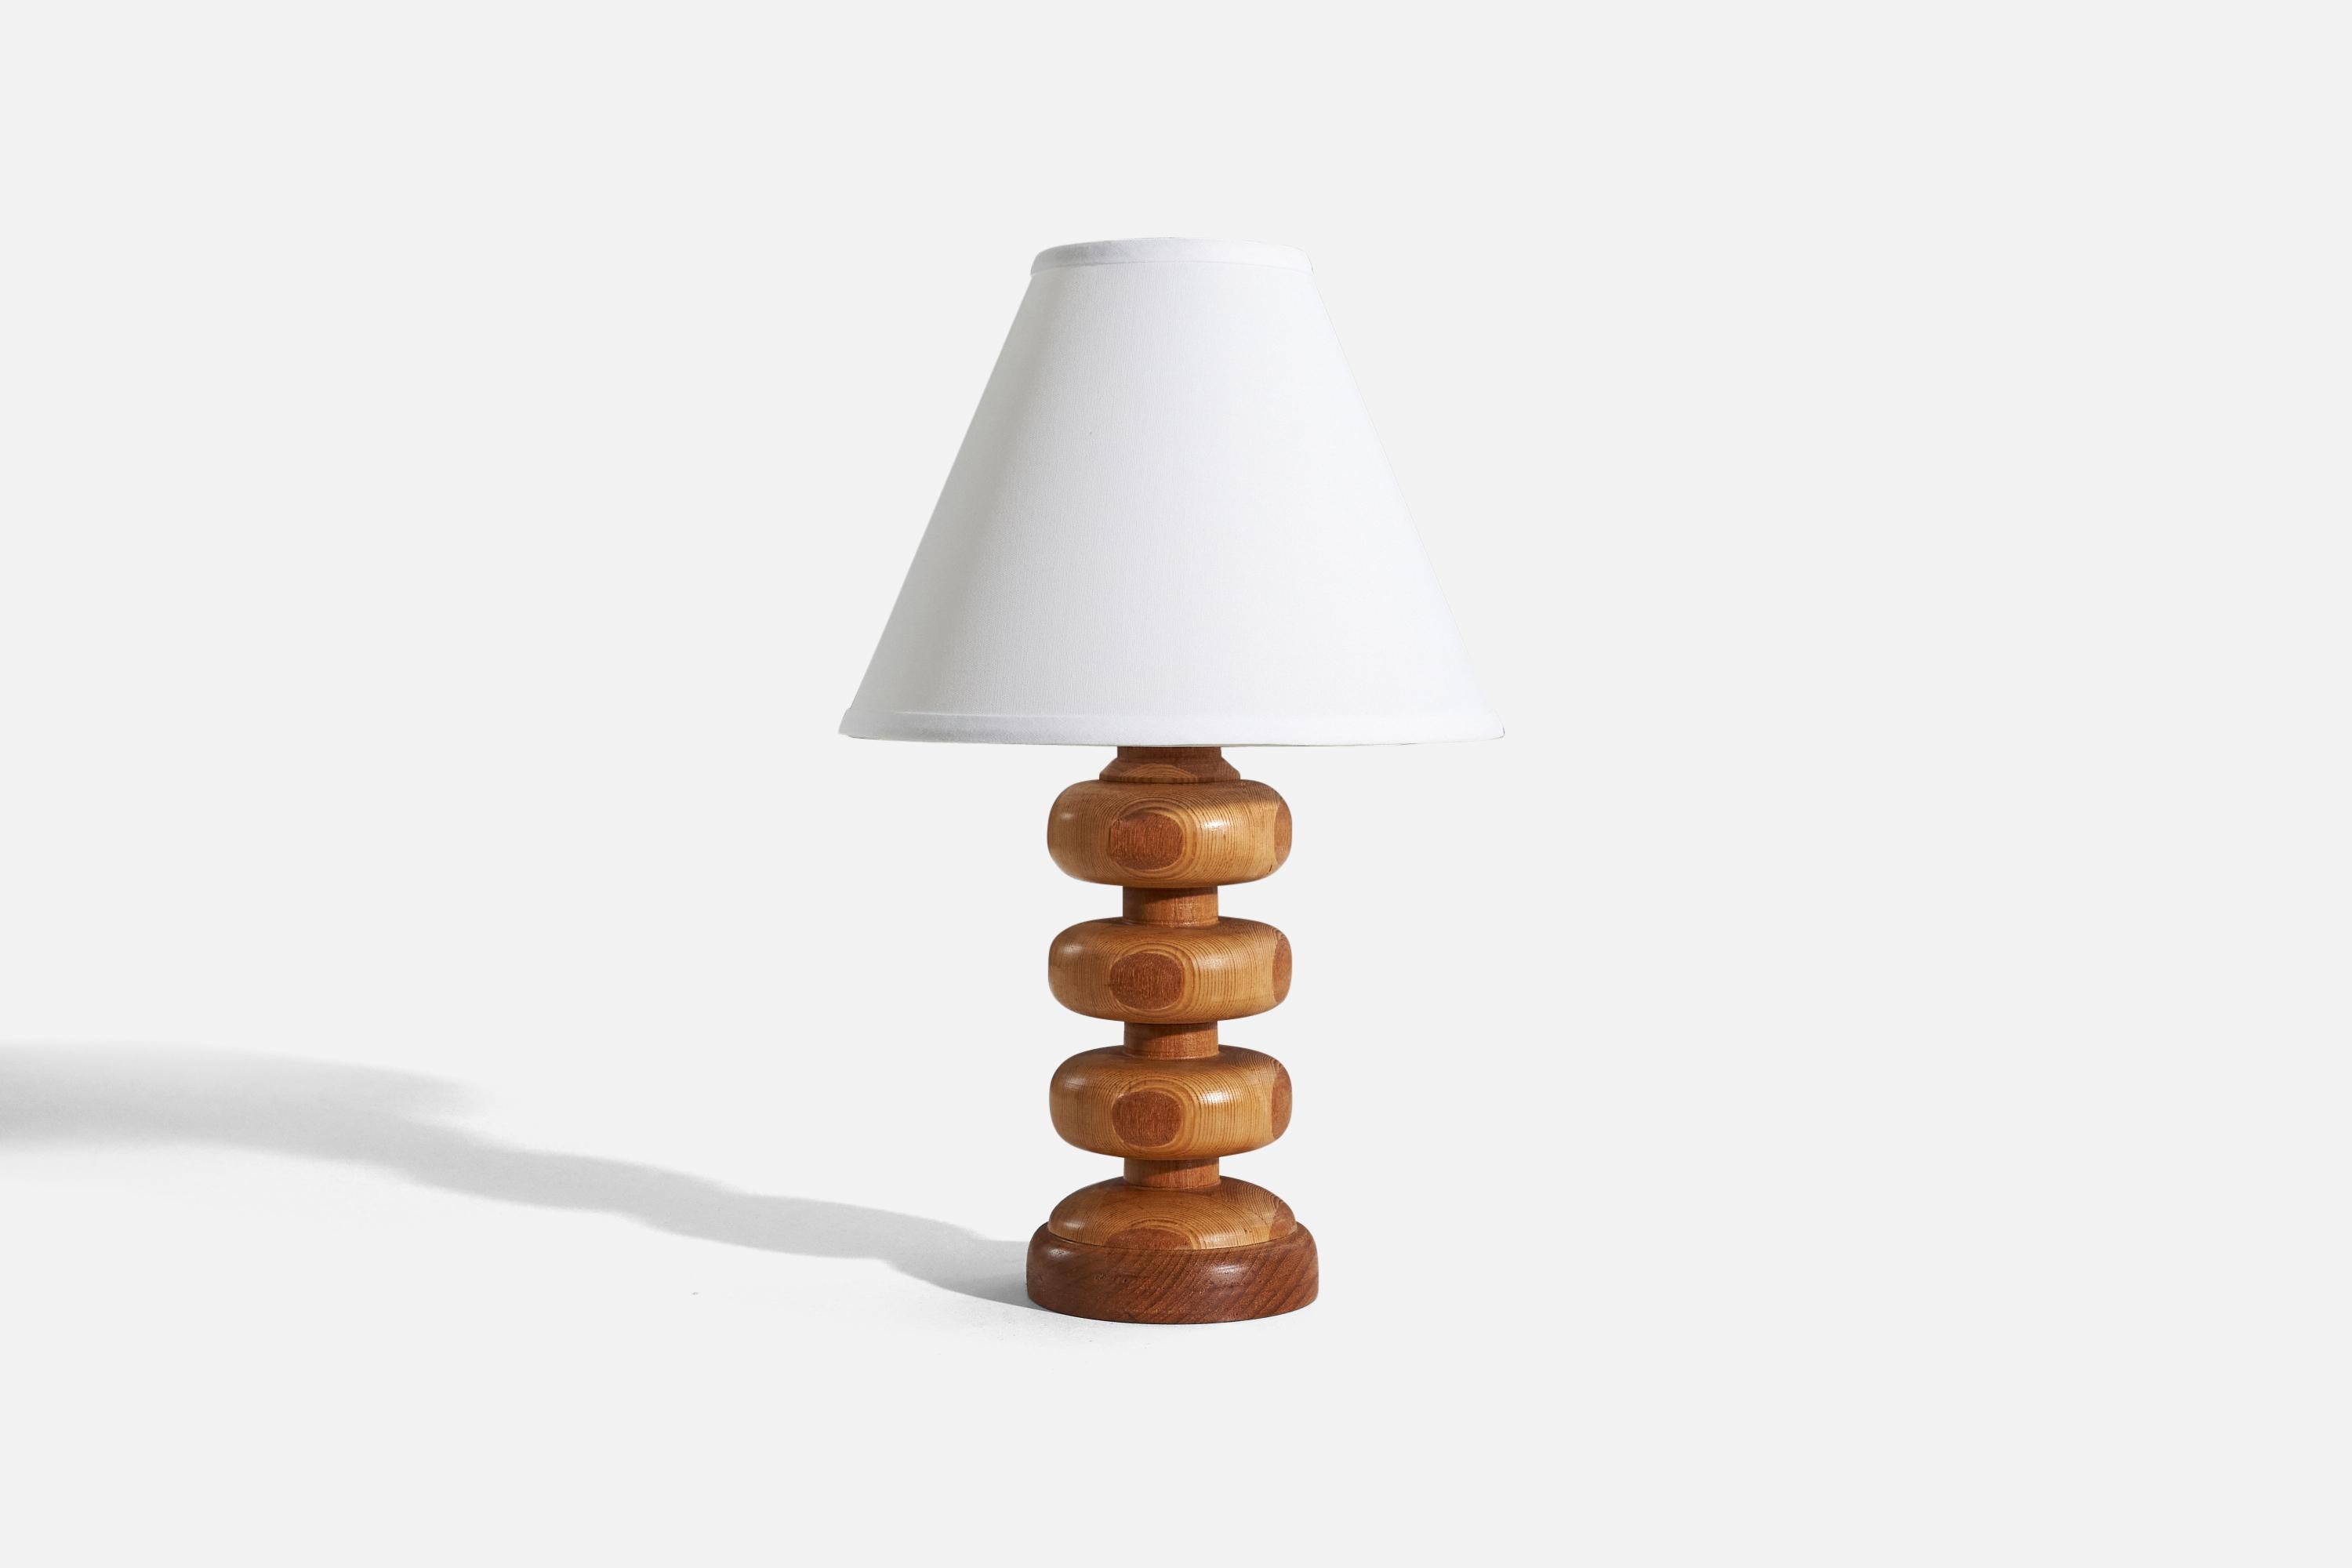 A wooden table lamp, designed and produced by a Swedish designer, Sweden, 1970s.

Sold without lampshade. 
Dimensions of Lamp (inches) : 12.375 x 4.625 x 4.625 (H x W x D)
Dimensions of Shade (inches) : 4.25 x 10.25 x 8 (T x B x H)
Dimension of